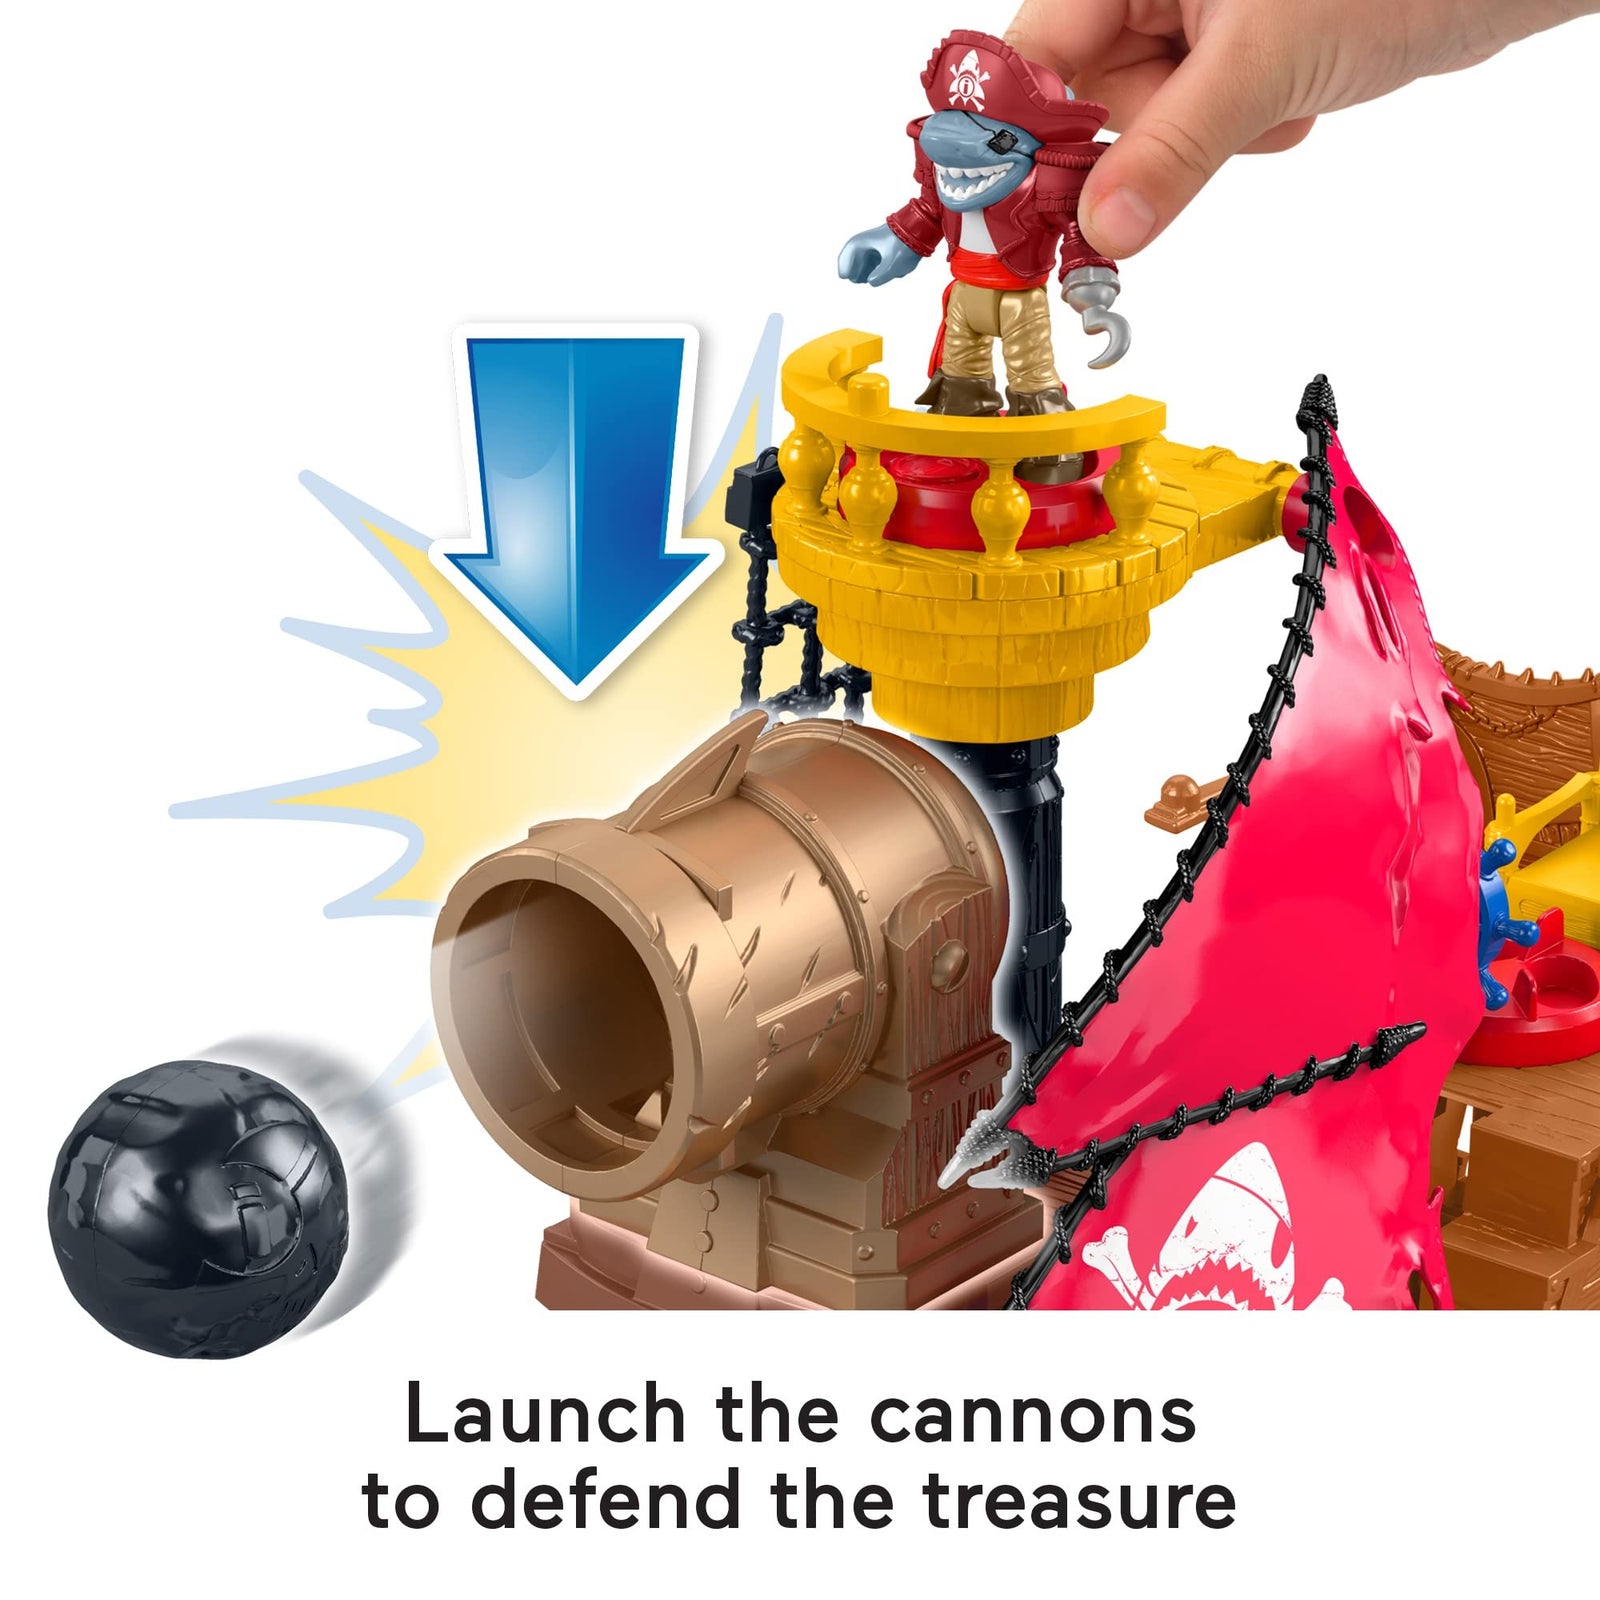 Fisher-Price Imaginext Shark Bite Pirate Ship, Playset with Pirate Figures and Accessories for Preschool Kids Ages 3 to 8 Years